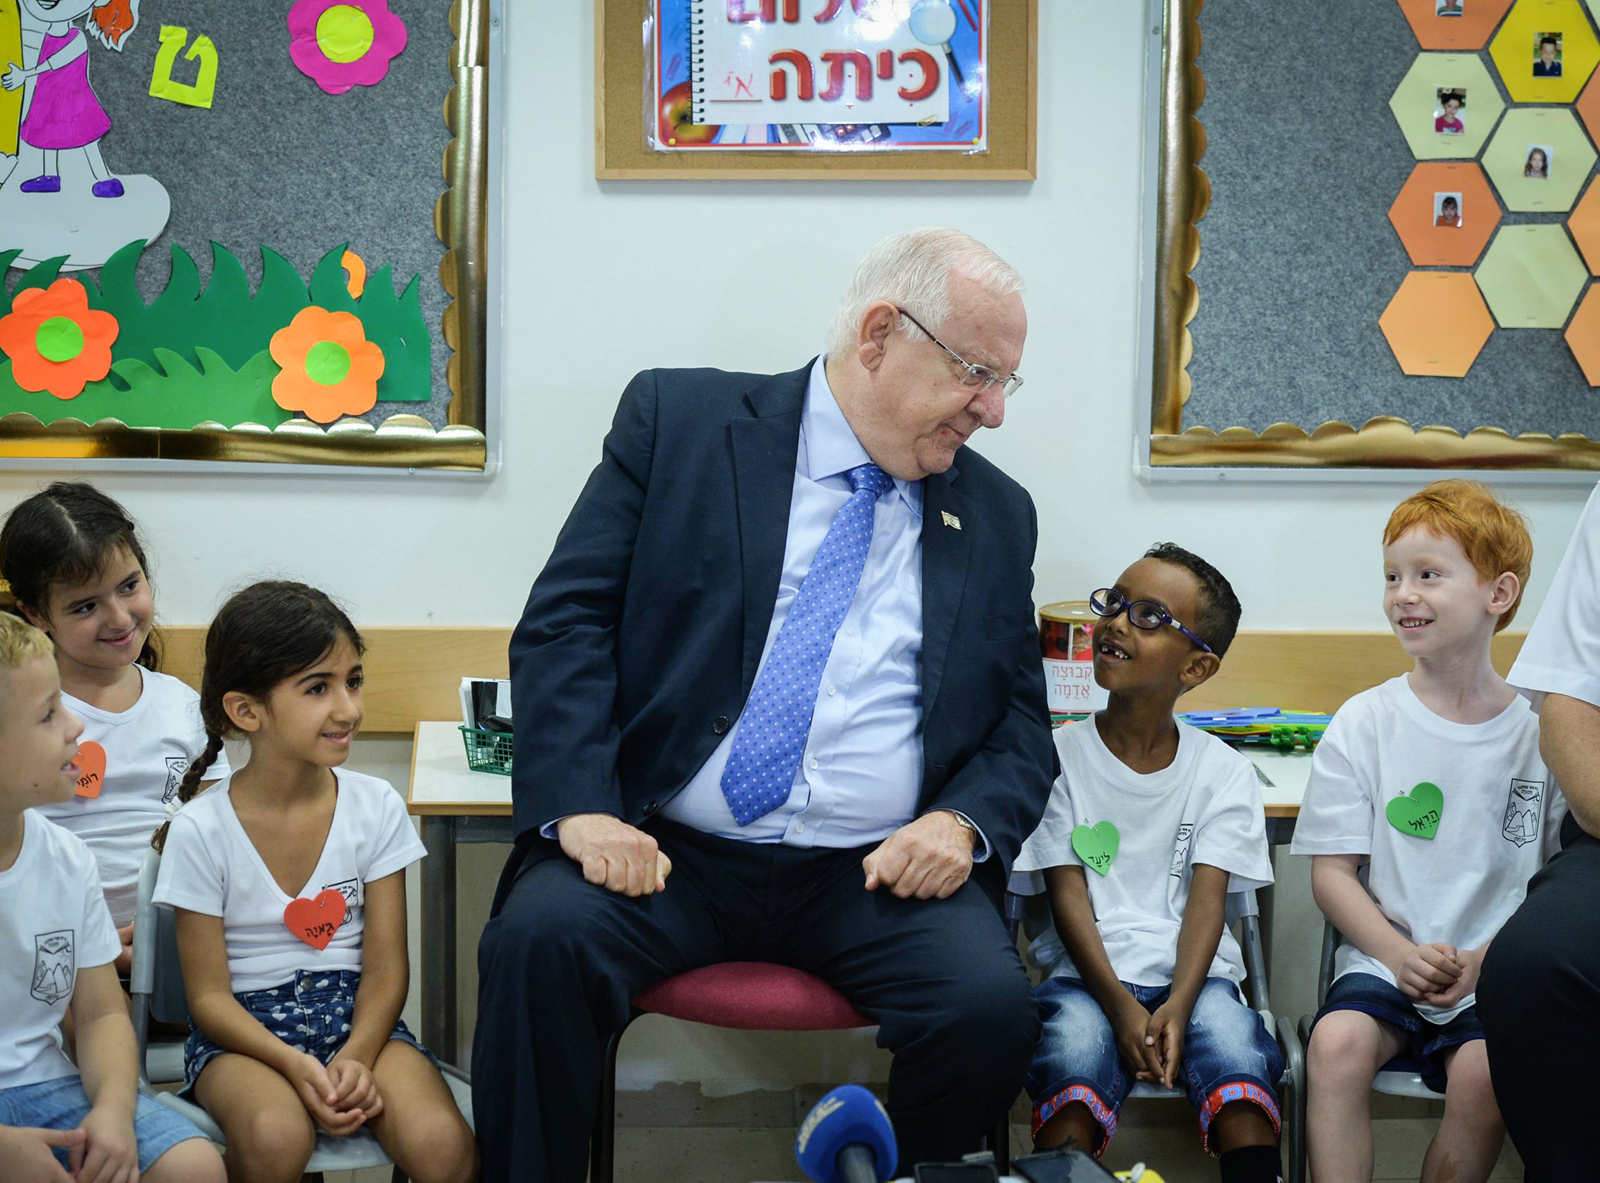 President Reuven Rivlin visits an elementary school in Kiryat Bialik, on the first day of school for first graders. Photo by Mark Neyman/GPO 